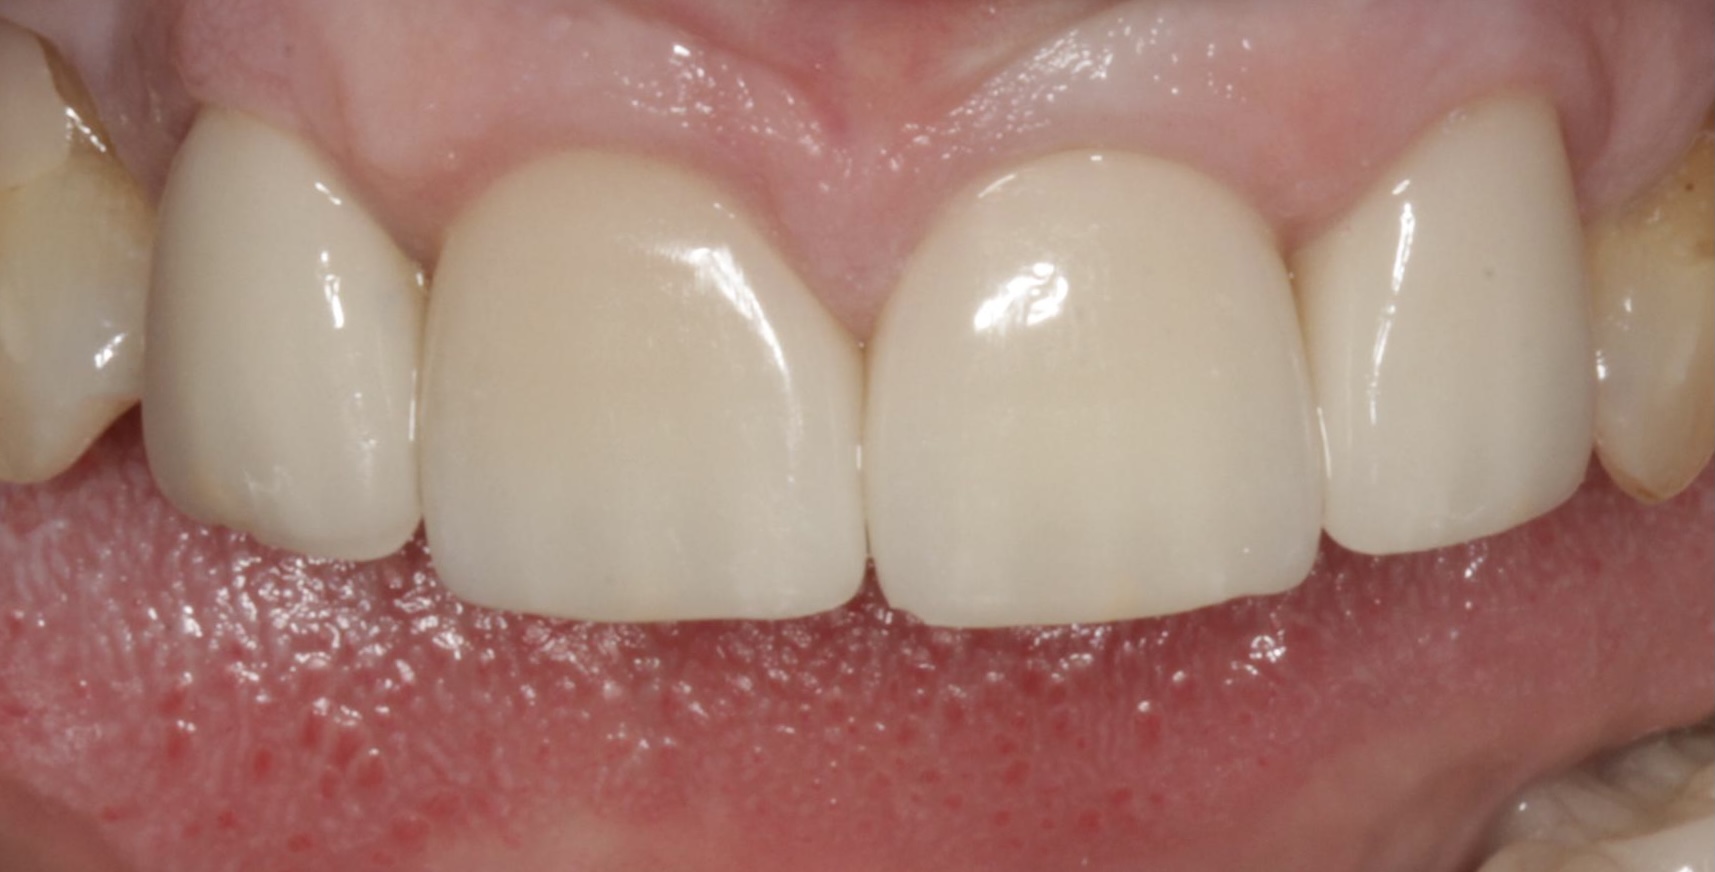 Patient case features PRO-Craft All-Z Zirconia on 7-10.  ALL-Z offers approximately 1400 in MPA strength and a conditional lifetime guarantee against breakage. | Pro-Craft